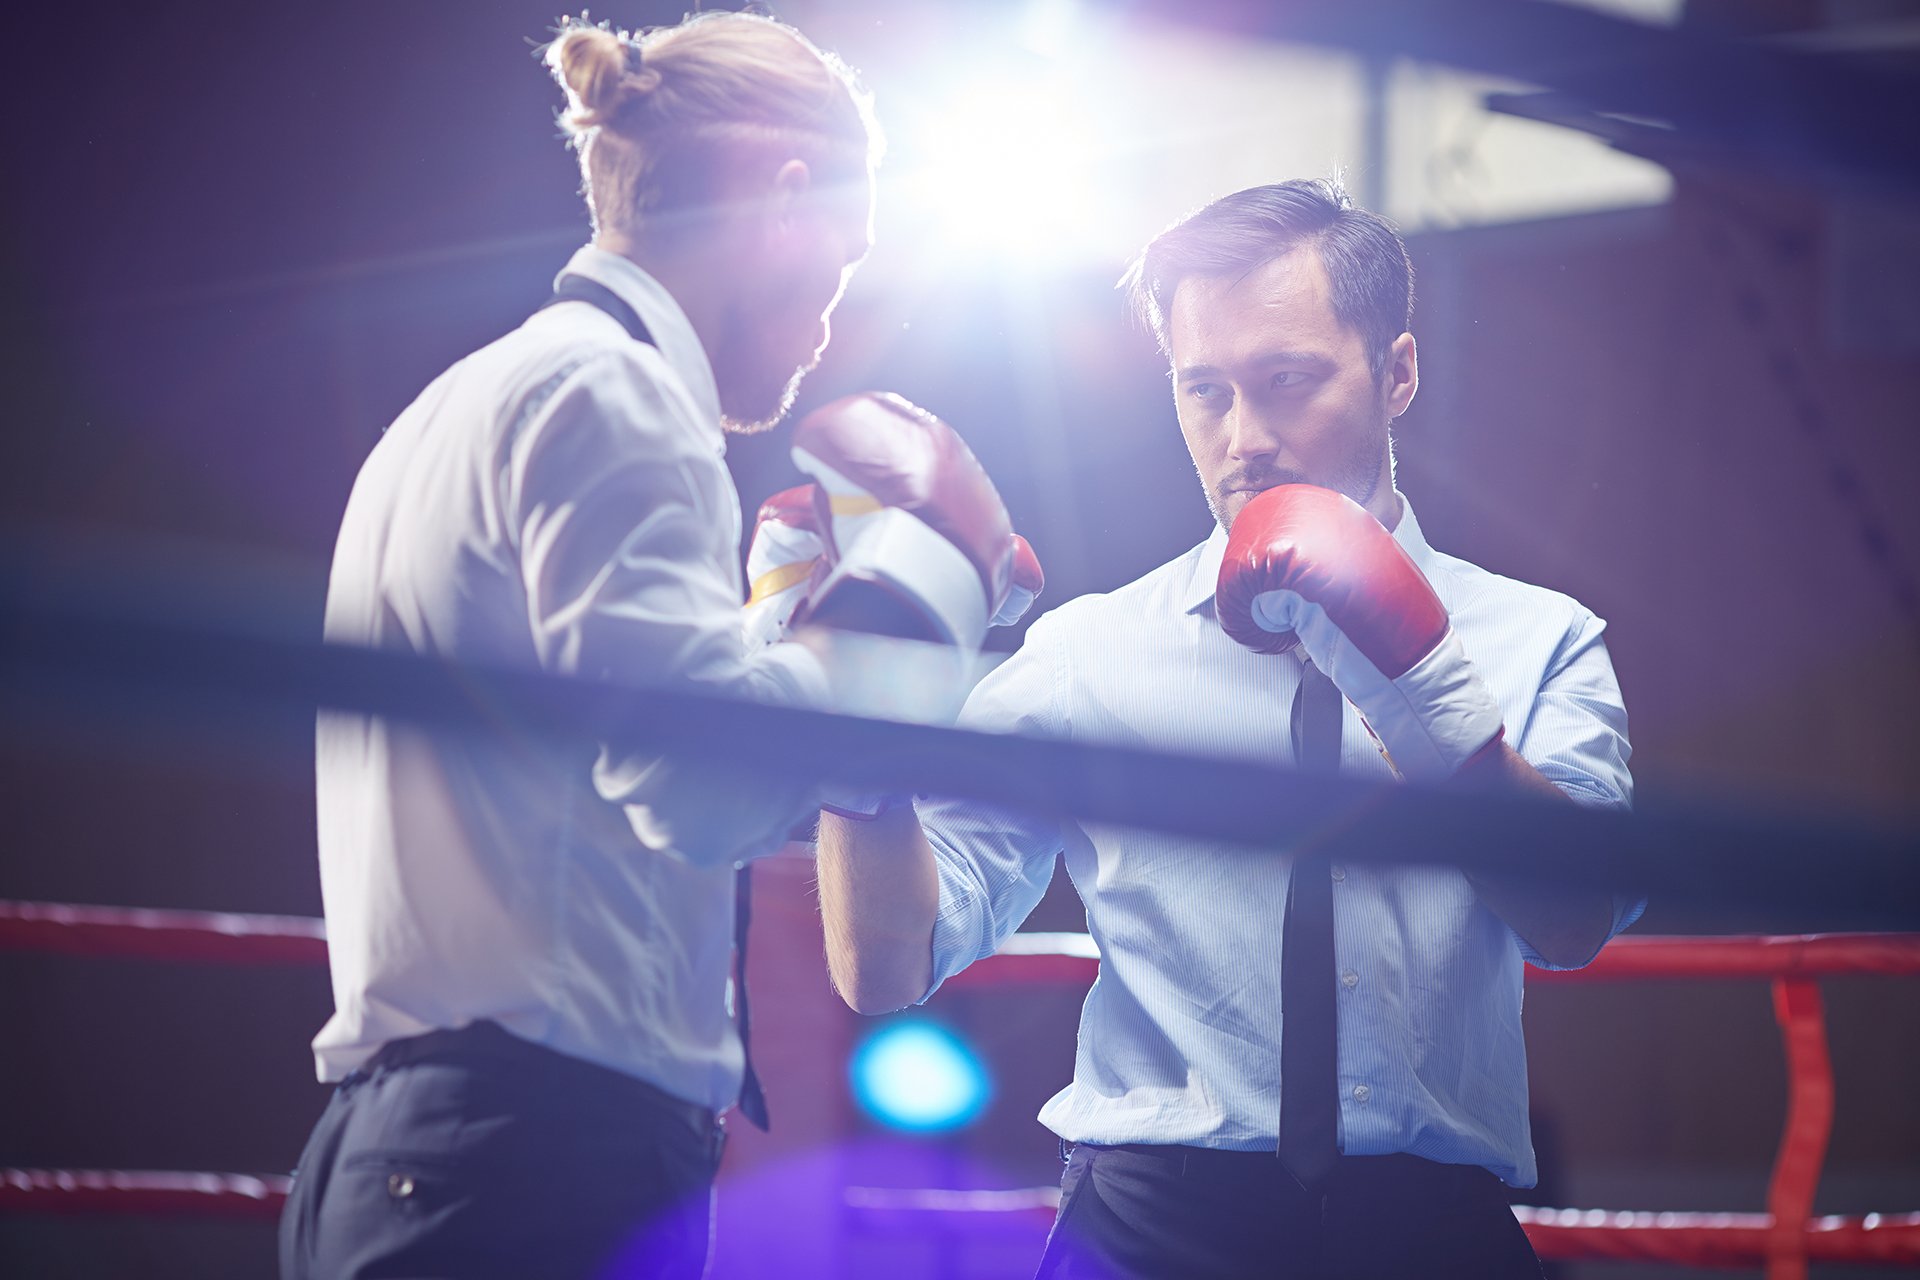 Dealing with Conflict in the Workplace
